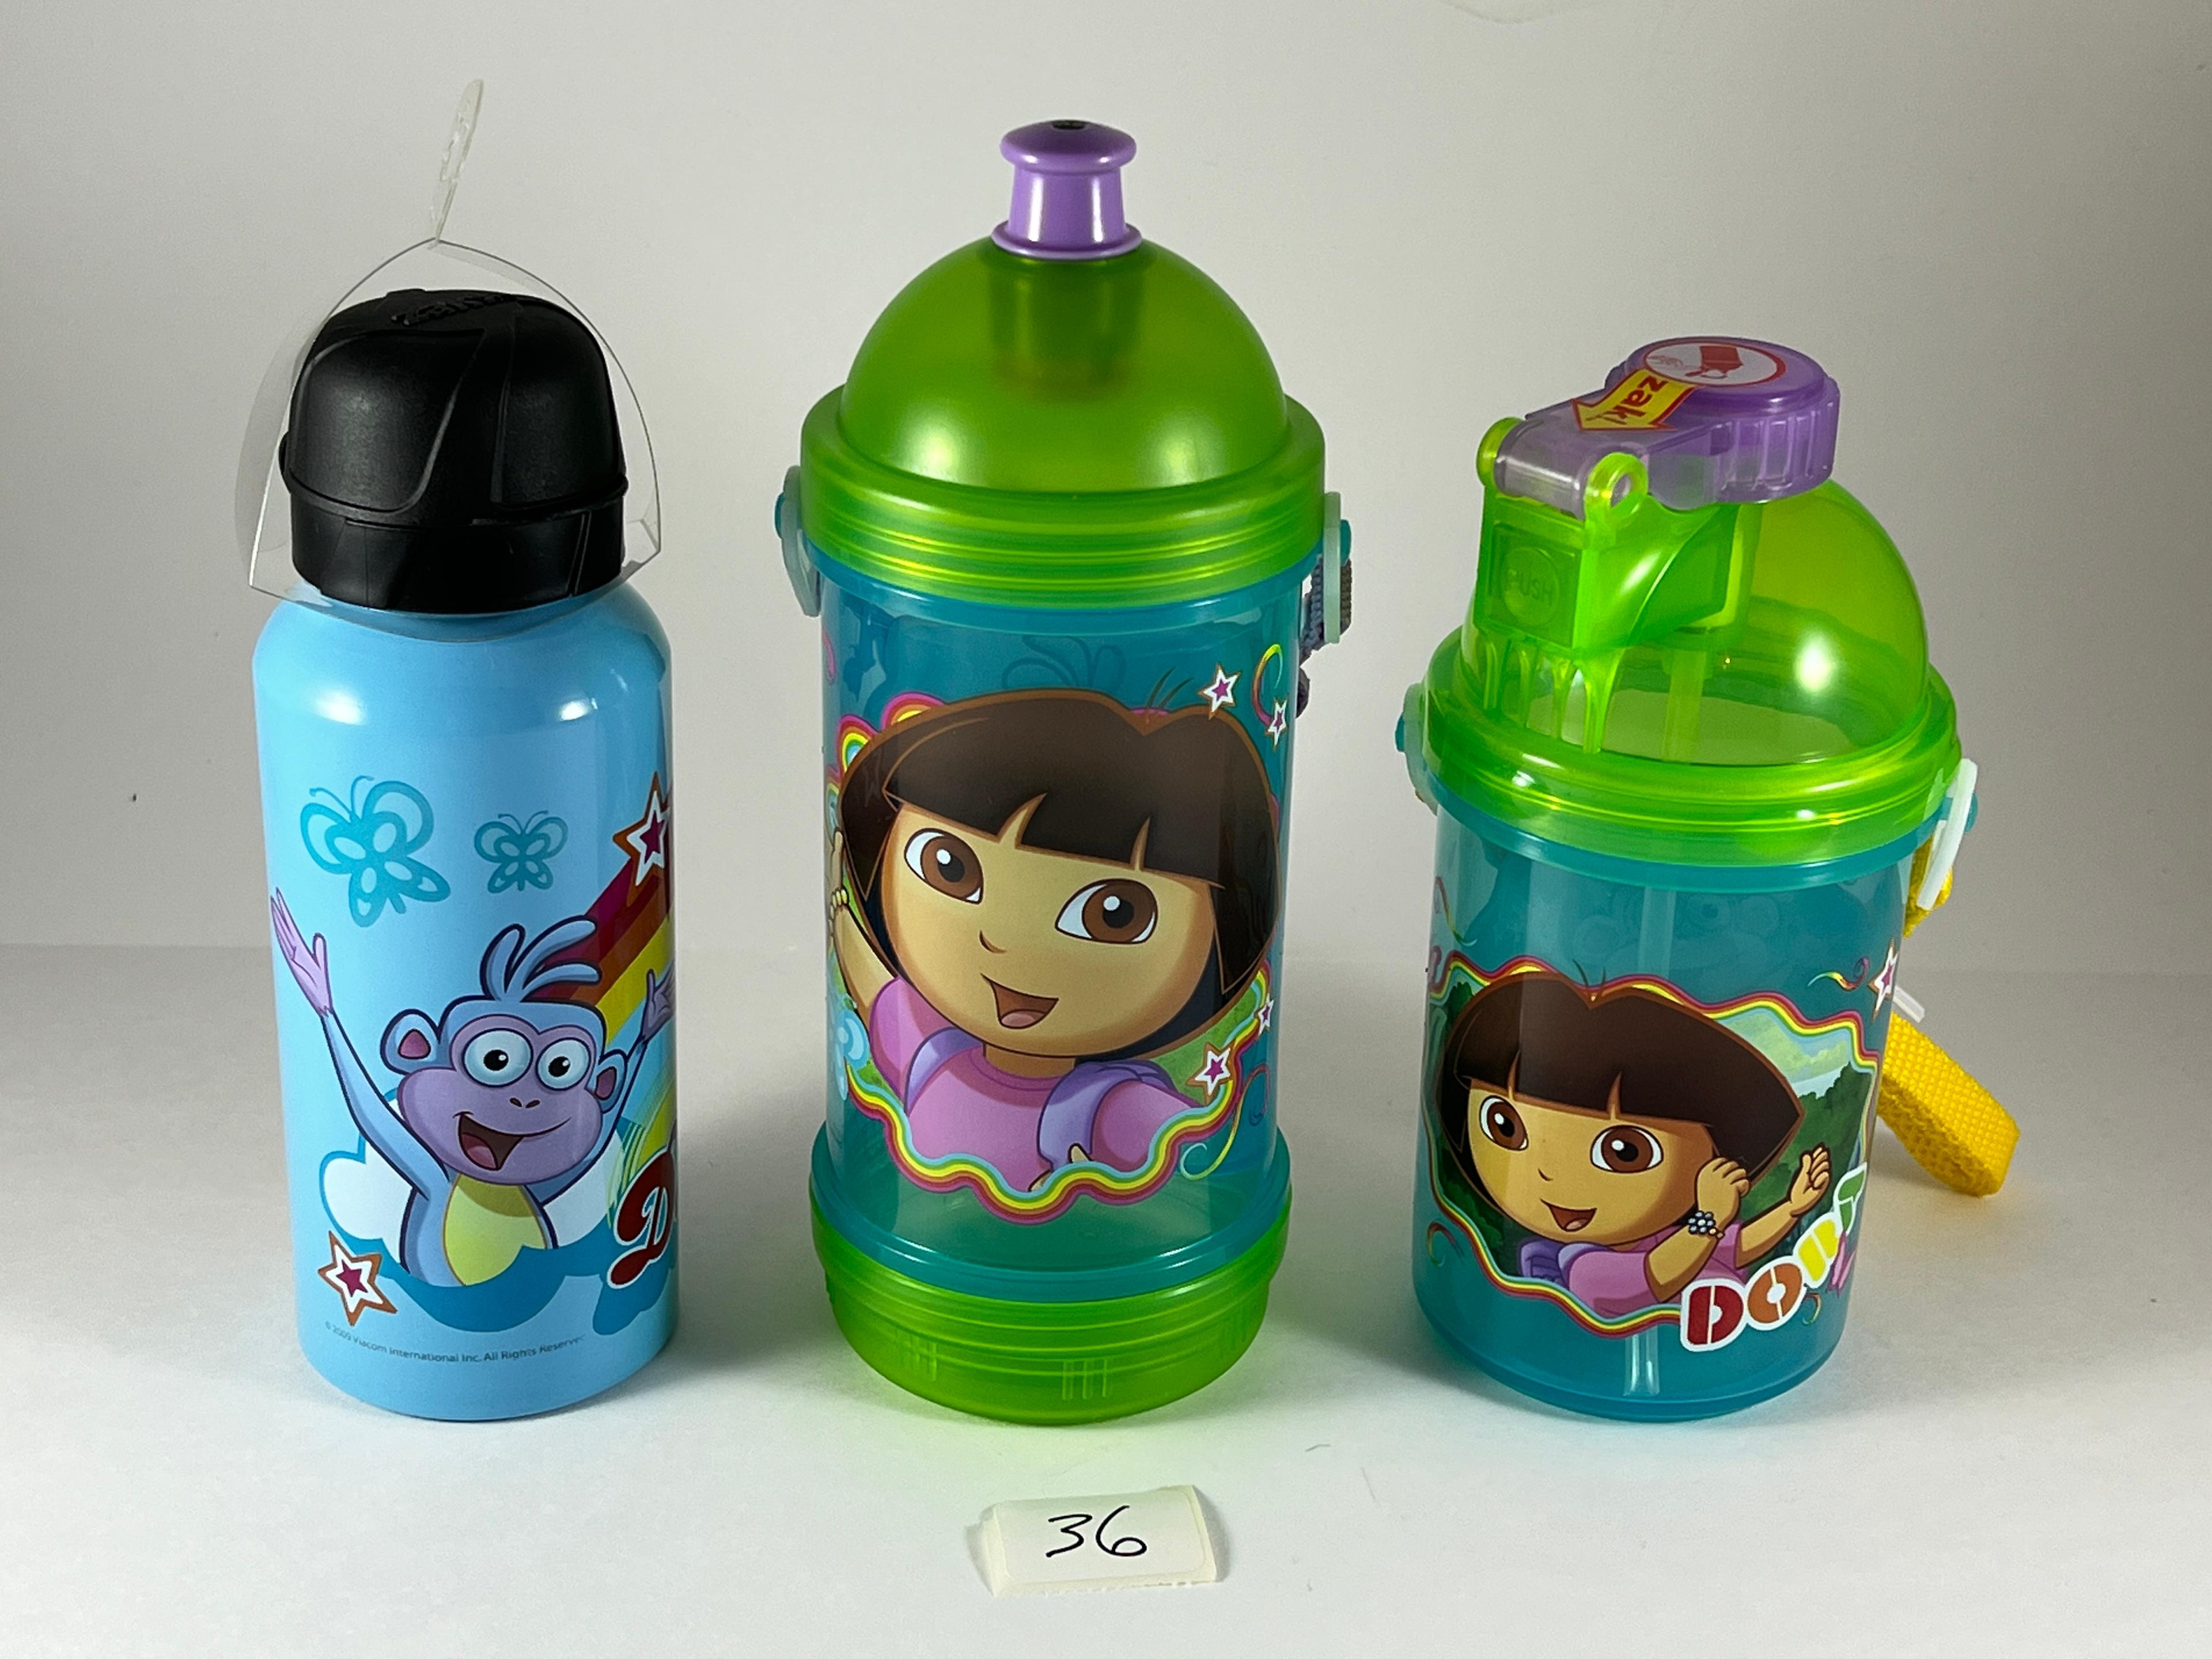 Dora drink cups and bottle